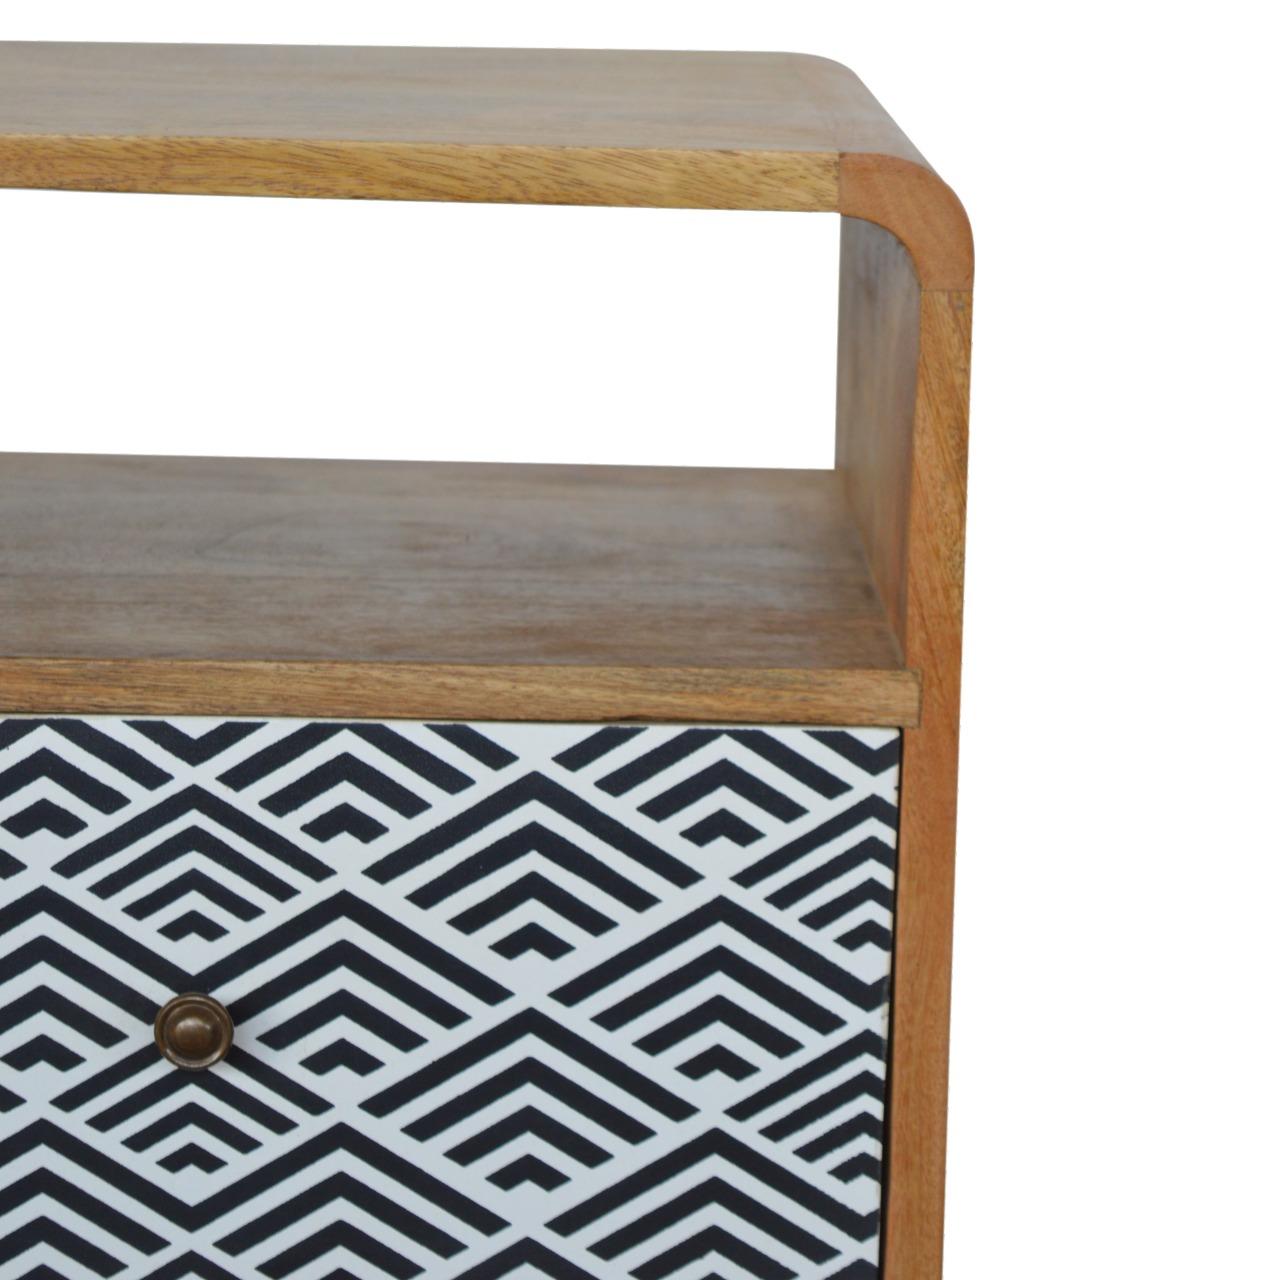 Monochrome Print Bedside With Open Slot